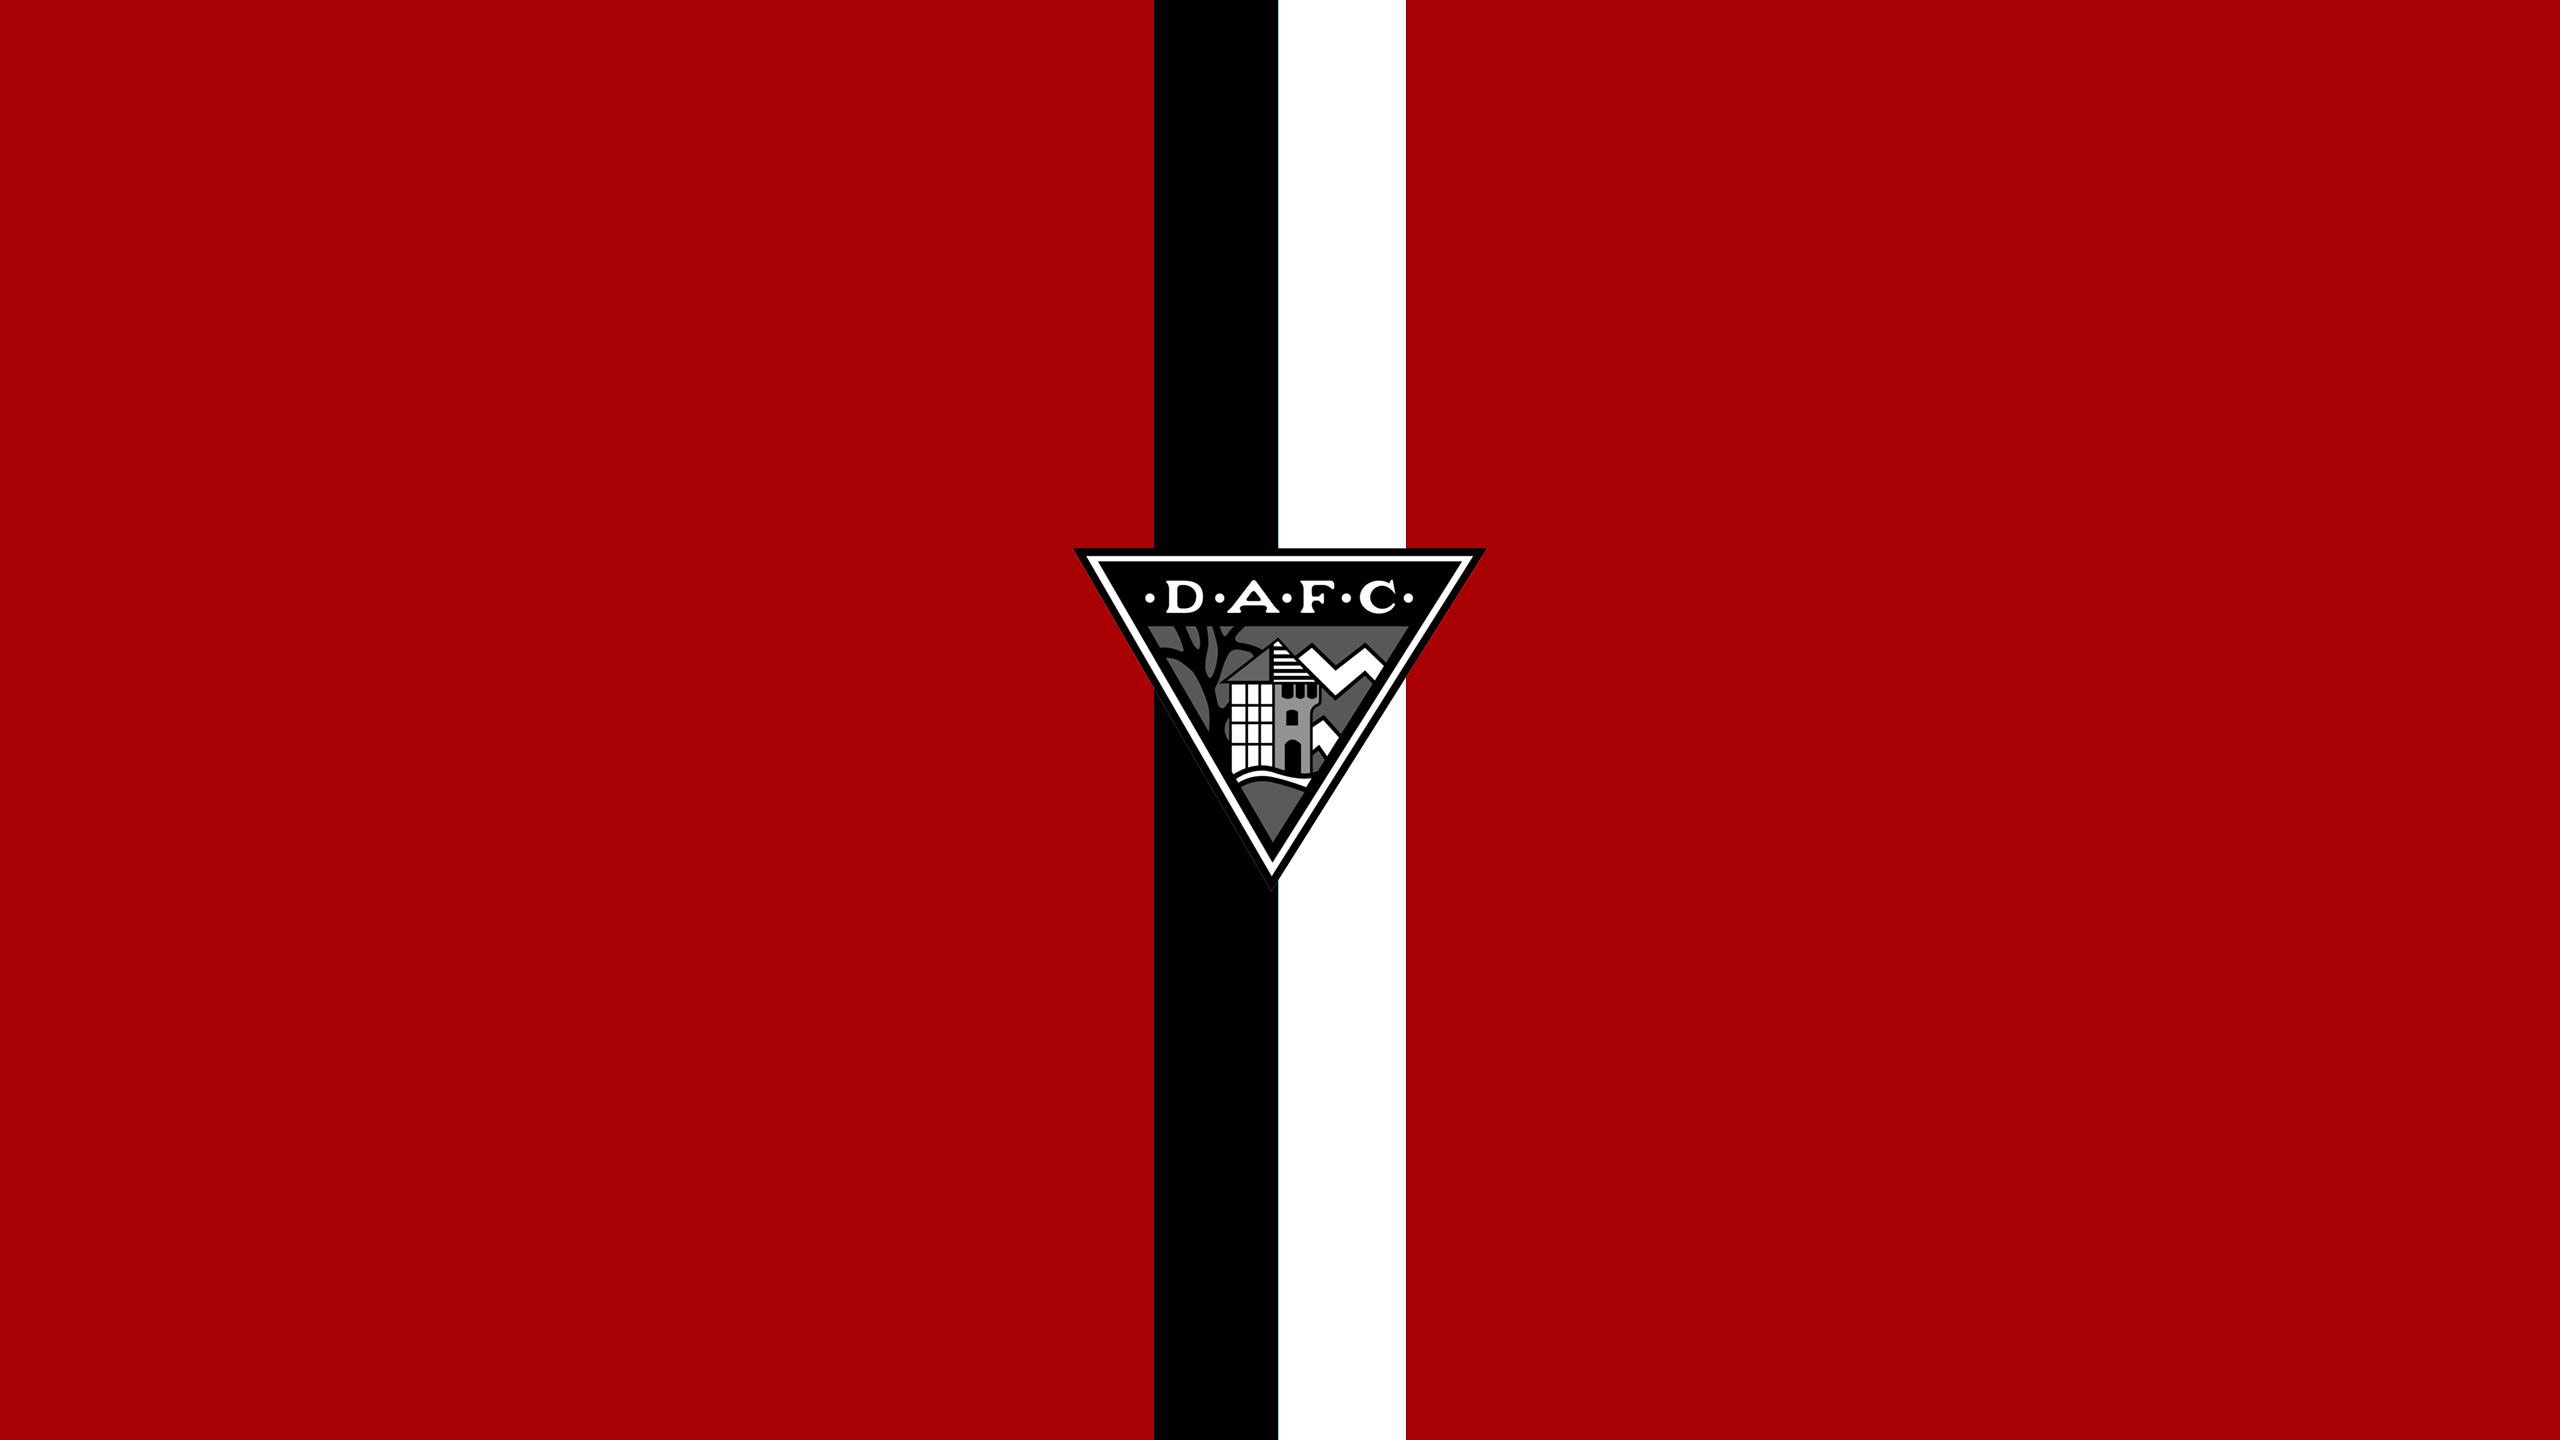 Dunfermline Athletic F.C. Wallpapers